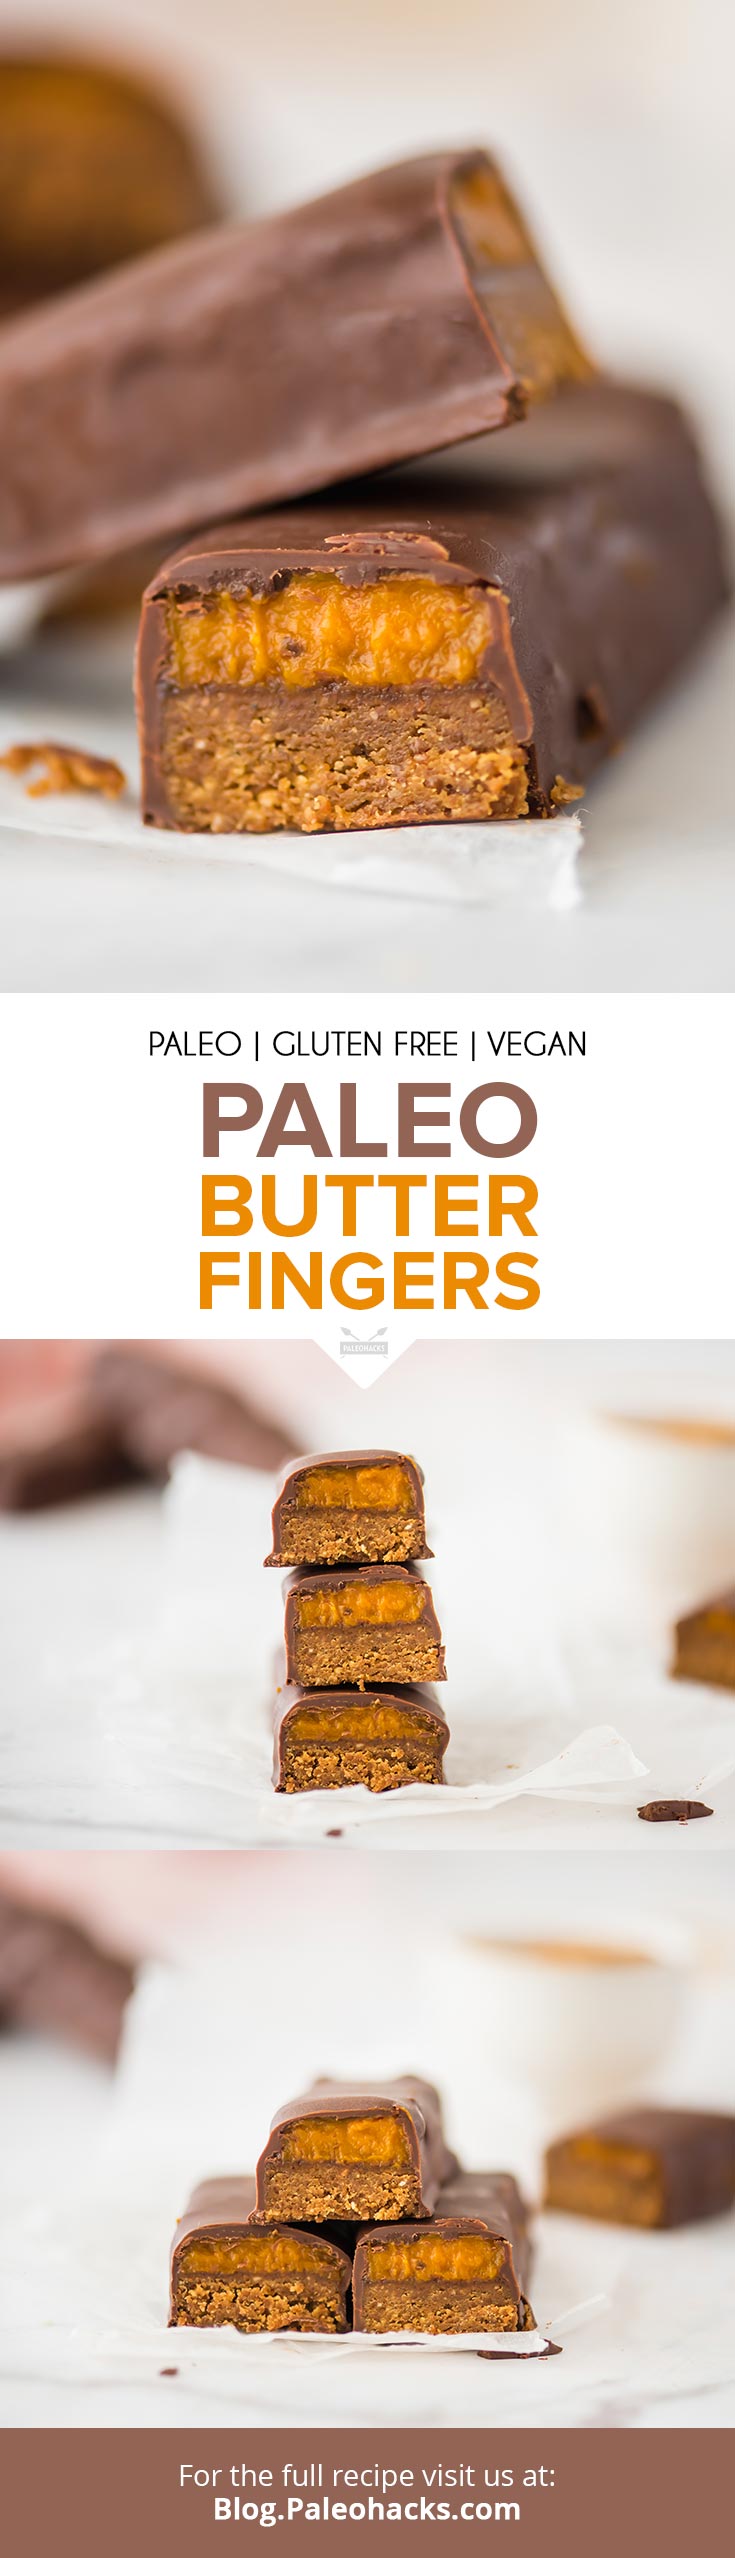 There’s something about a candy bar with a chocolate outside and a creamy, crunchy inside that we cannot resist. These paleo butter fingers hit the spot.